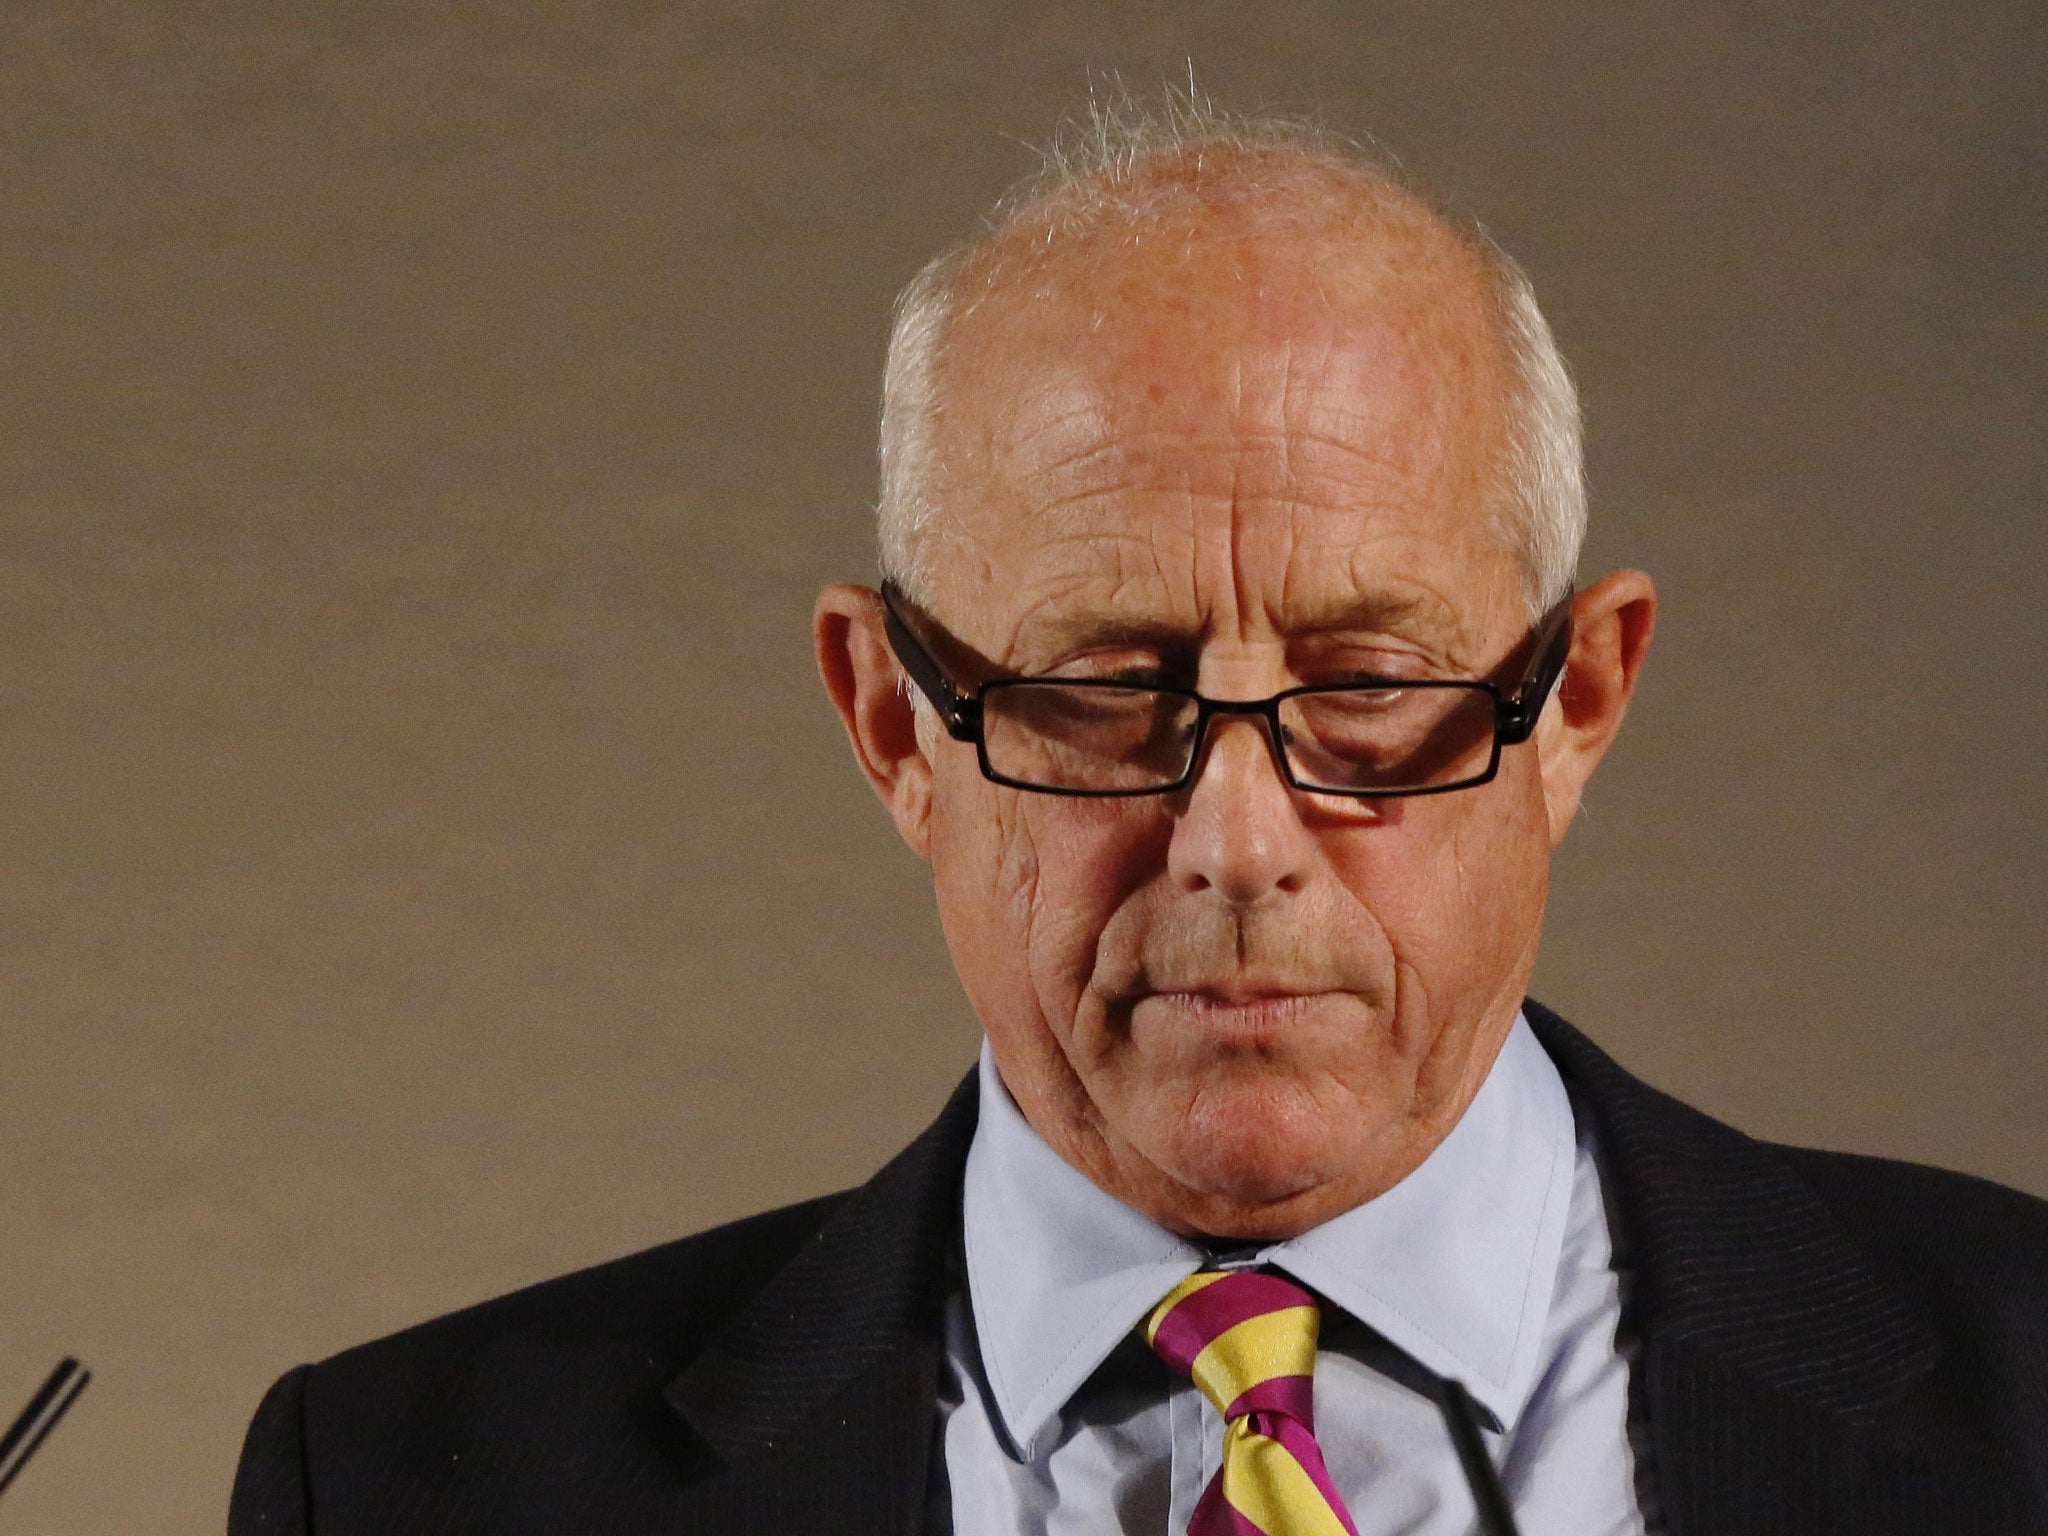 Godfrey Bloom lost the UK Independence Party whip after he jokingly described women as 'sluts'